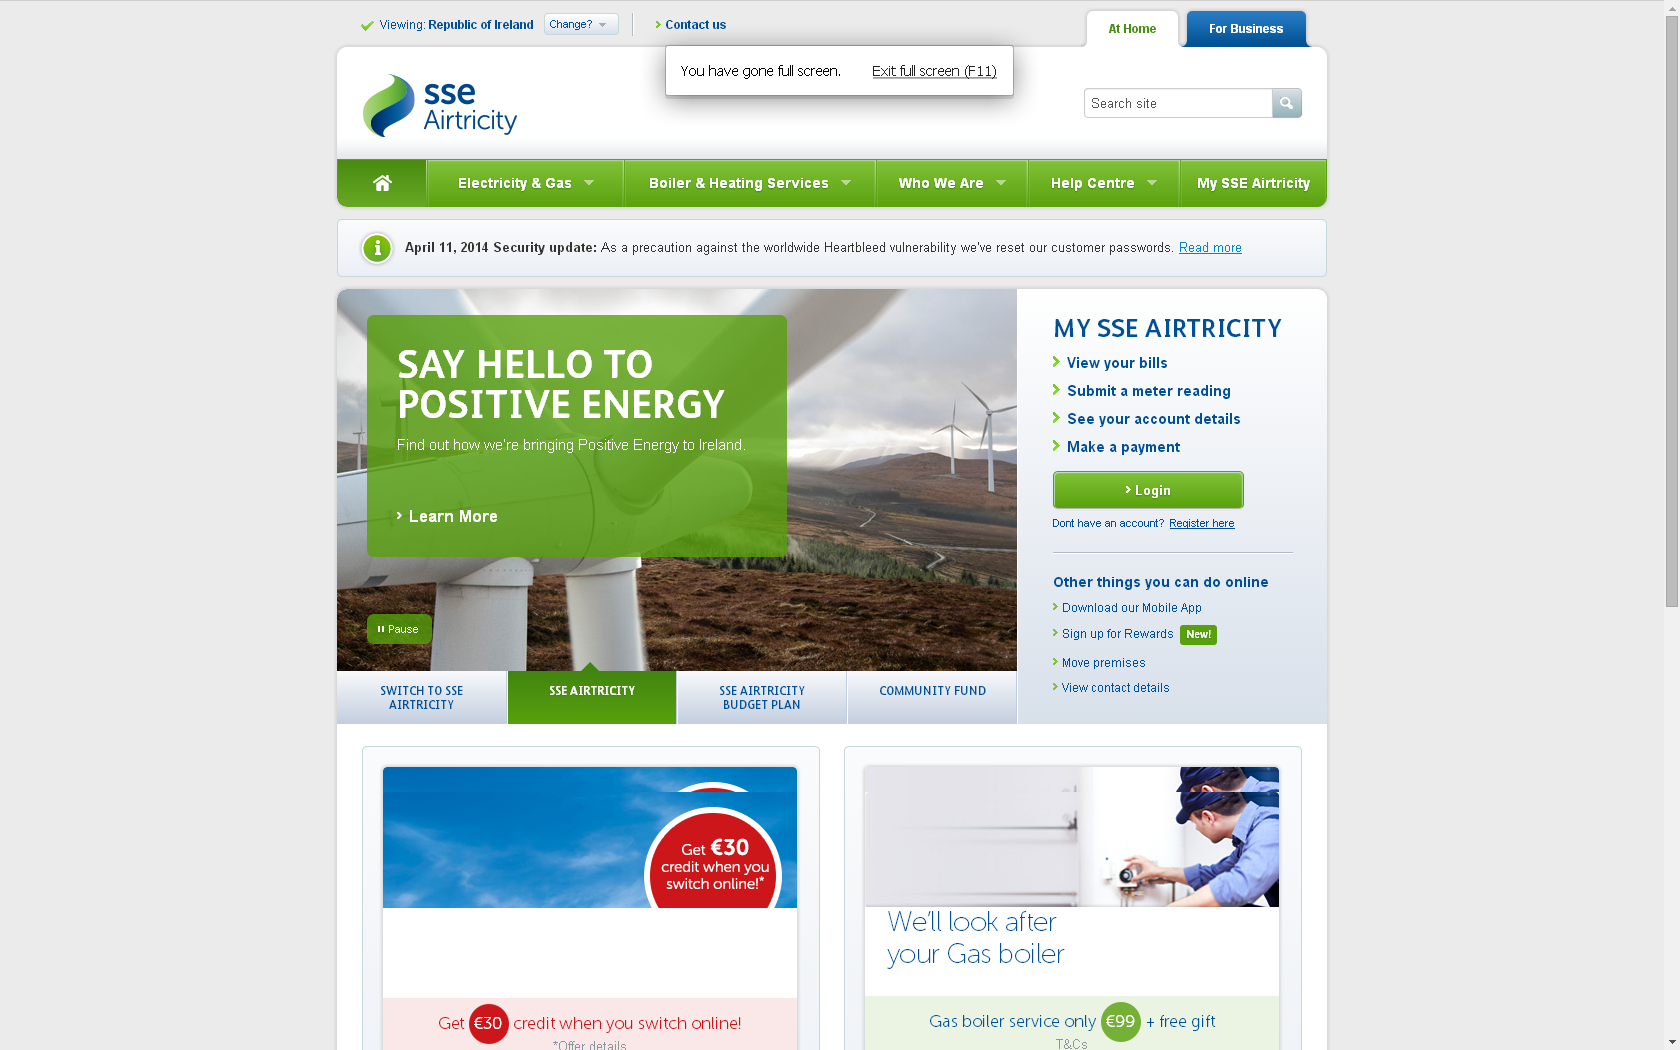 SSE Airtricity (sirocco)